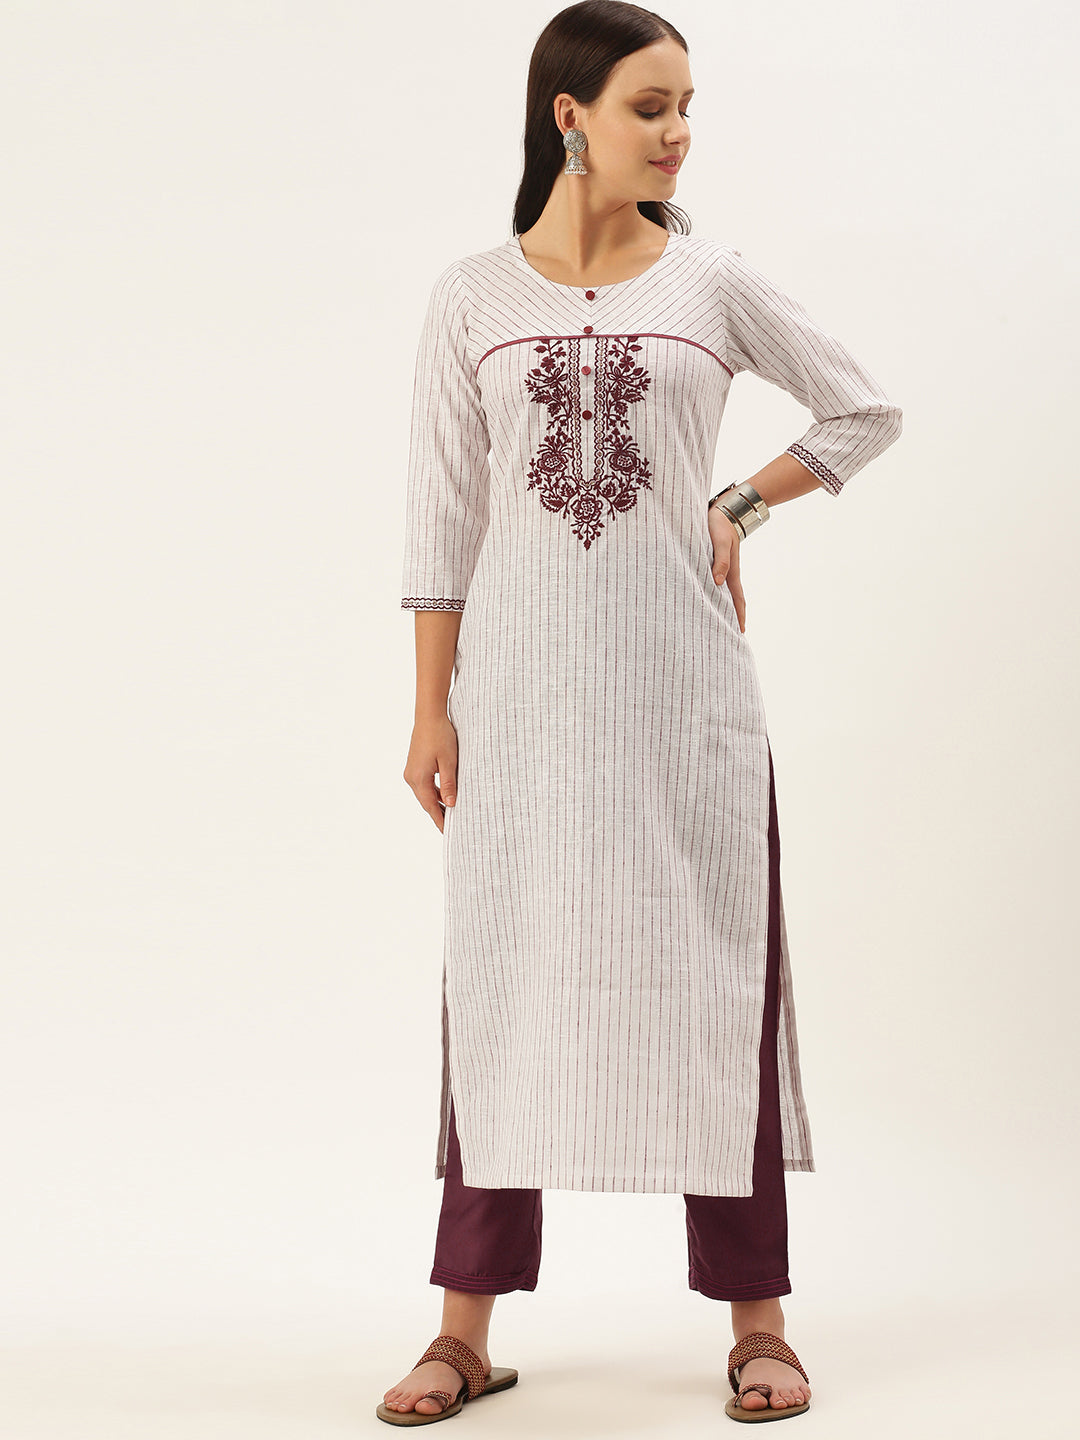 Women's White Color Cotton Blend Checked Striped Embroidered Kurta Pant Set - VAABA